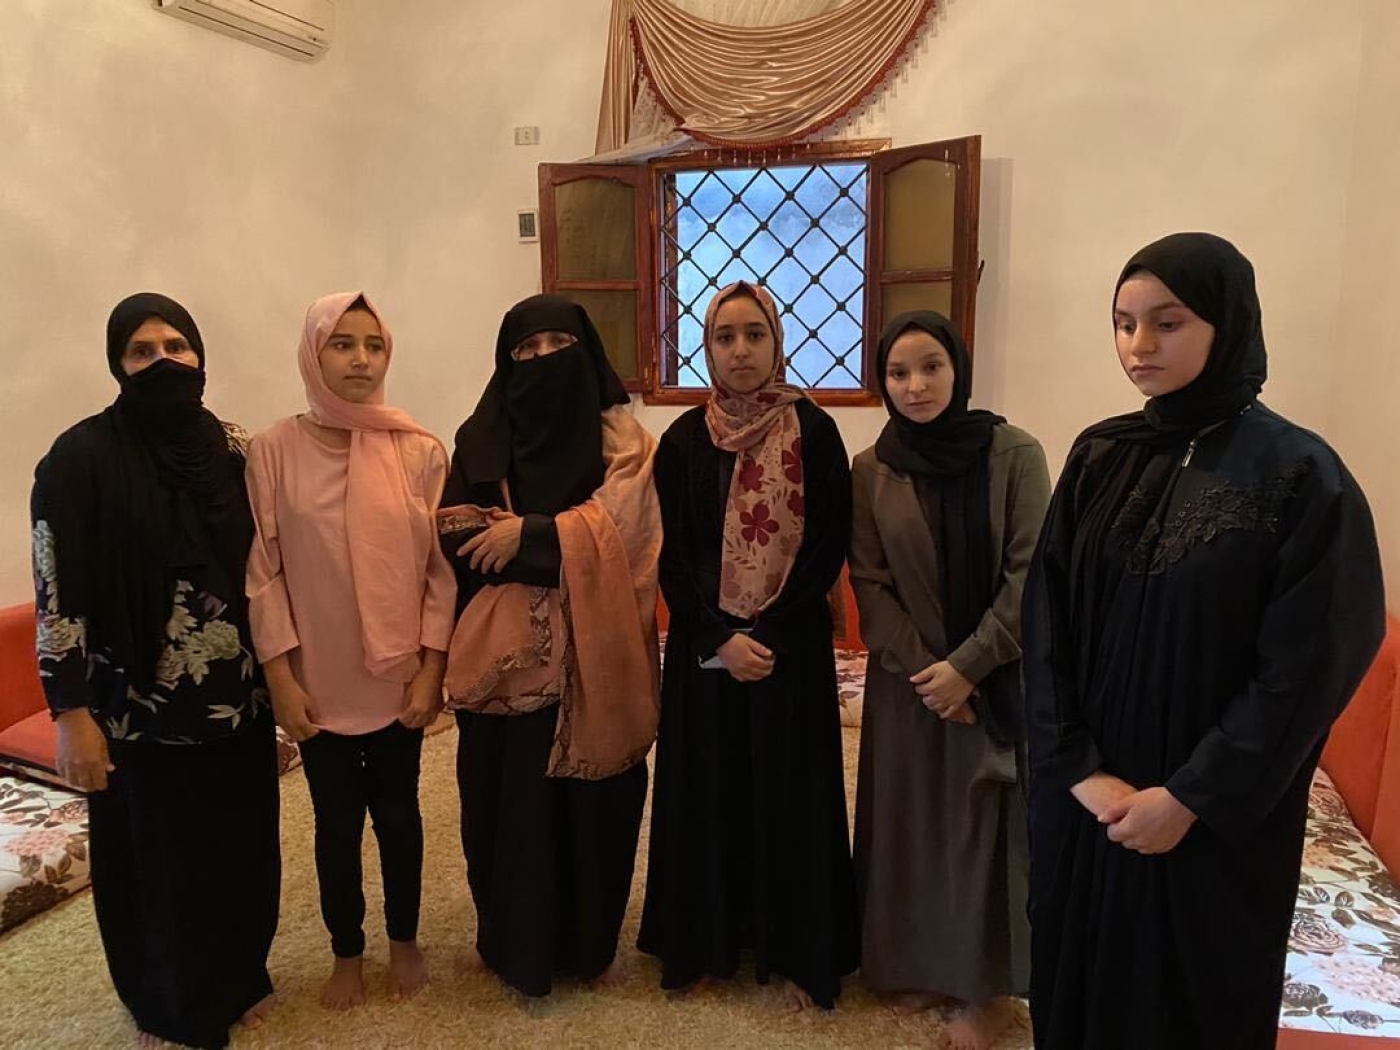 Rabia al-Jaballah, third from right, and other women of her family (MEE/Daniel Hilton)